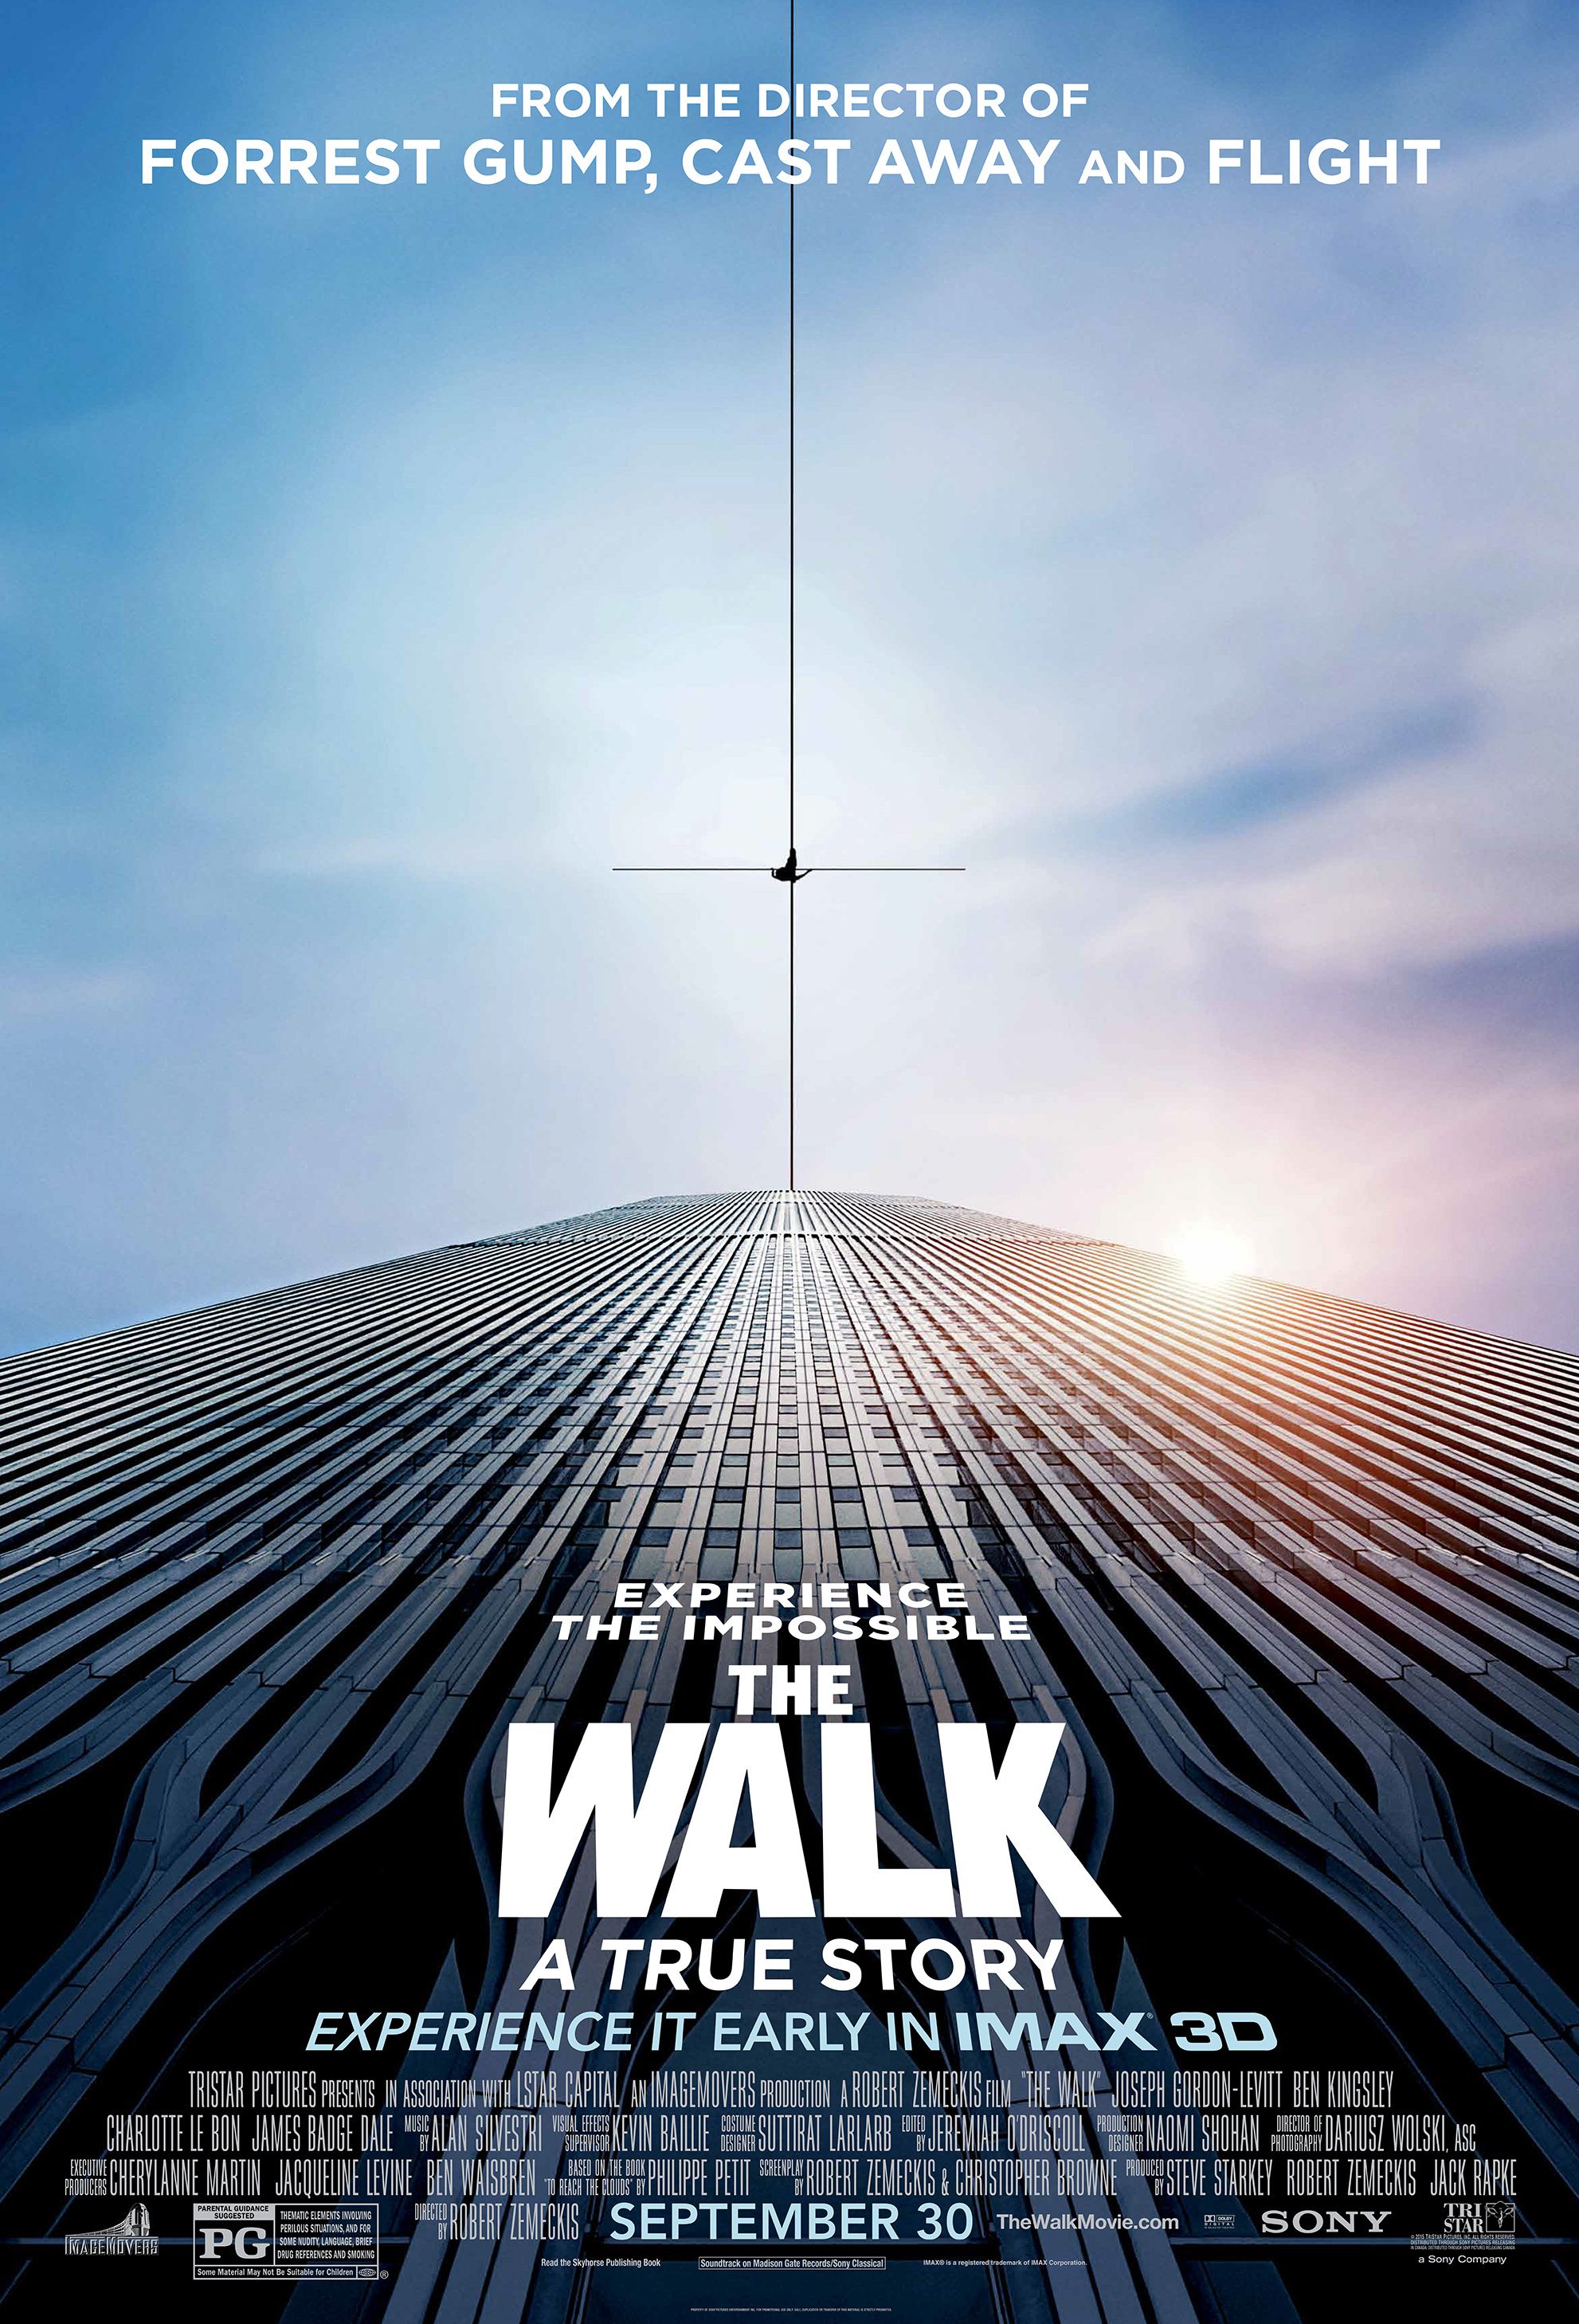 Experience The Impossible, The Walk, IMAX Poster